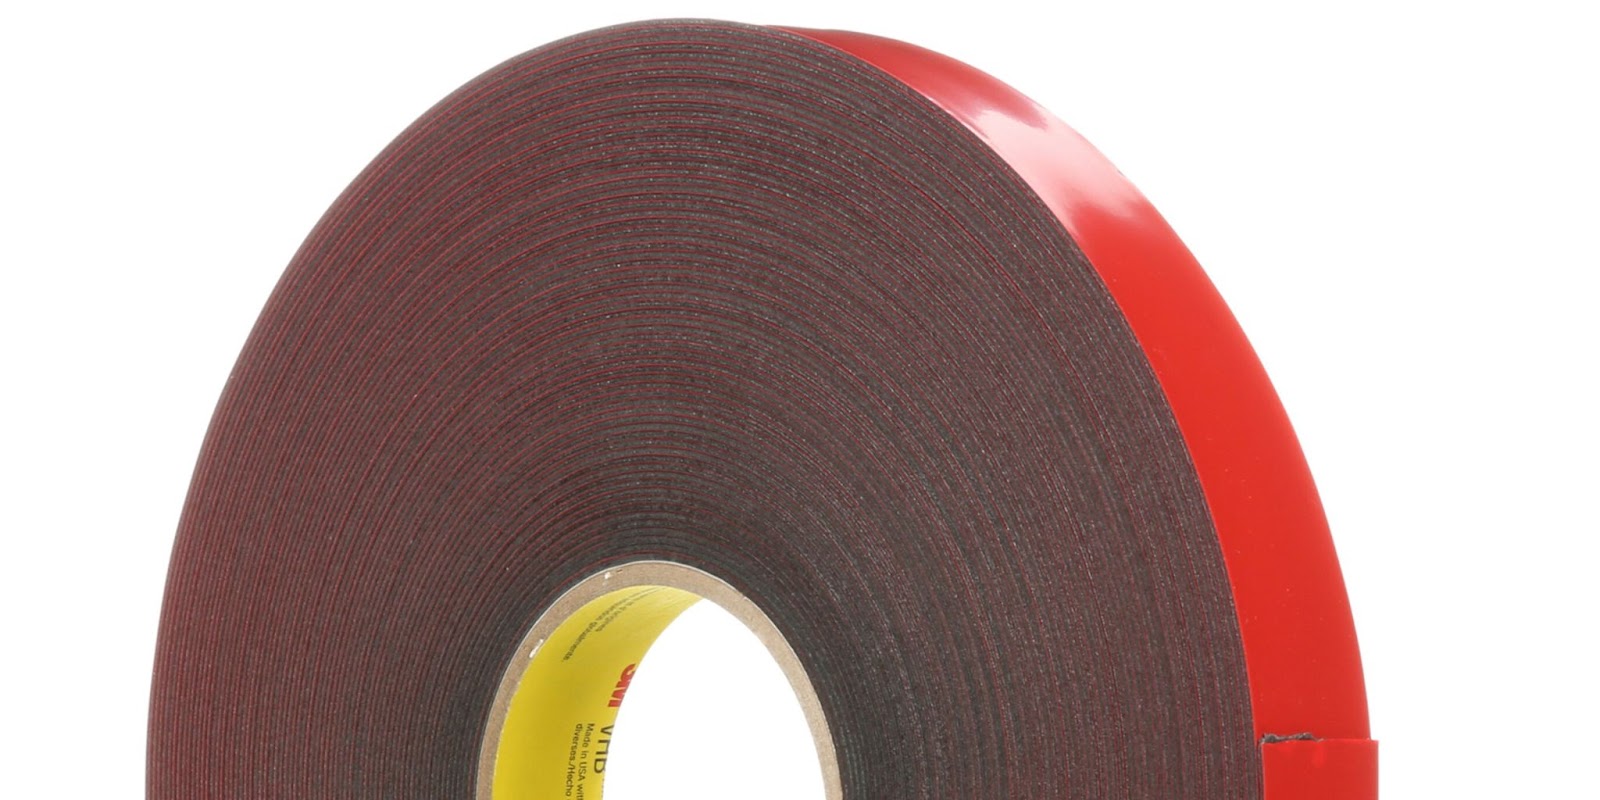 3M VHB Tape [40 mil / transparent] (4910): 1/2 in. x 15 ft. (Clear) 